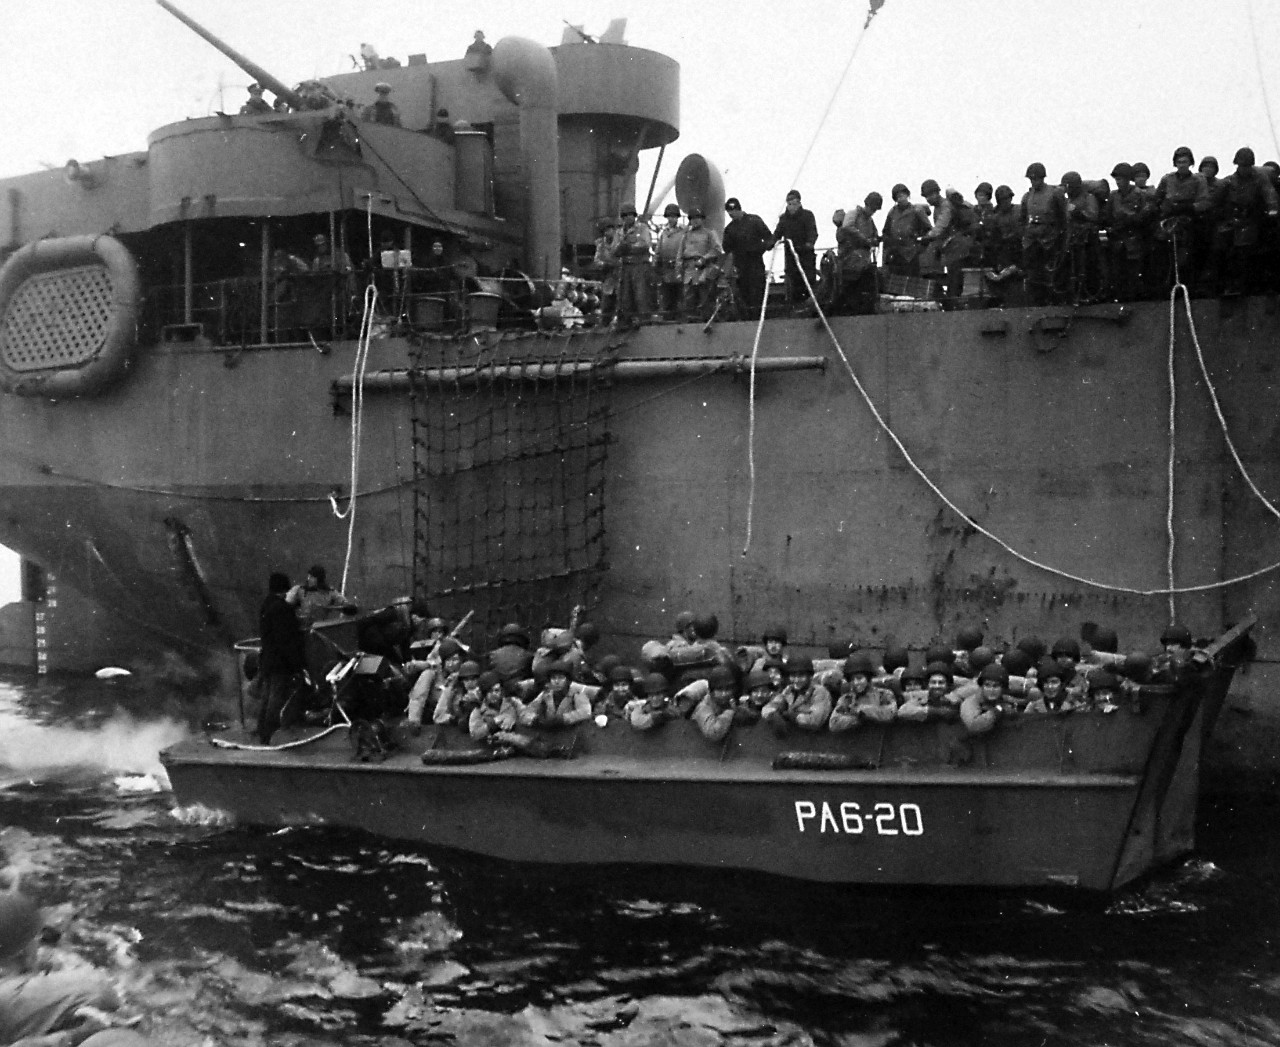 80-G-50788:   Aleutian Islands Campaign, June 1942 - August 1943.  Battle for Attu, May 1943.   Troops in landing boats alongside USS Heywood (APA-6) off Attu, Aleutian Islands, May 11th, 1943.   U.S. Navy Photograph, now in the collections of the National Archives.  (2016/05/10).